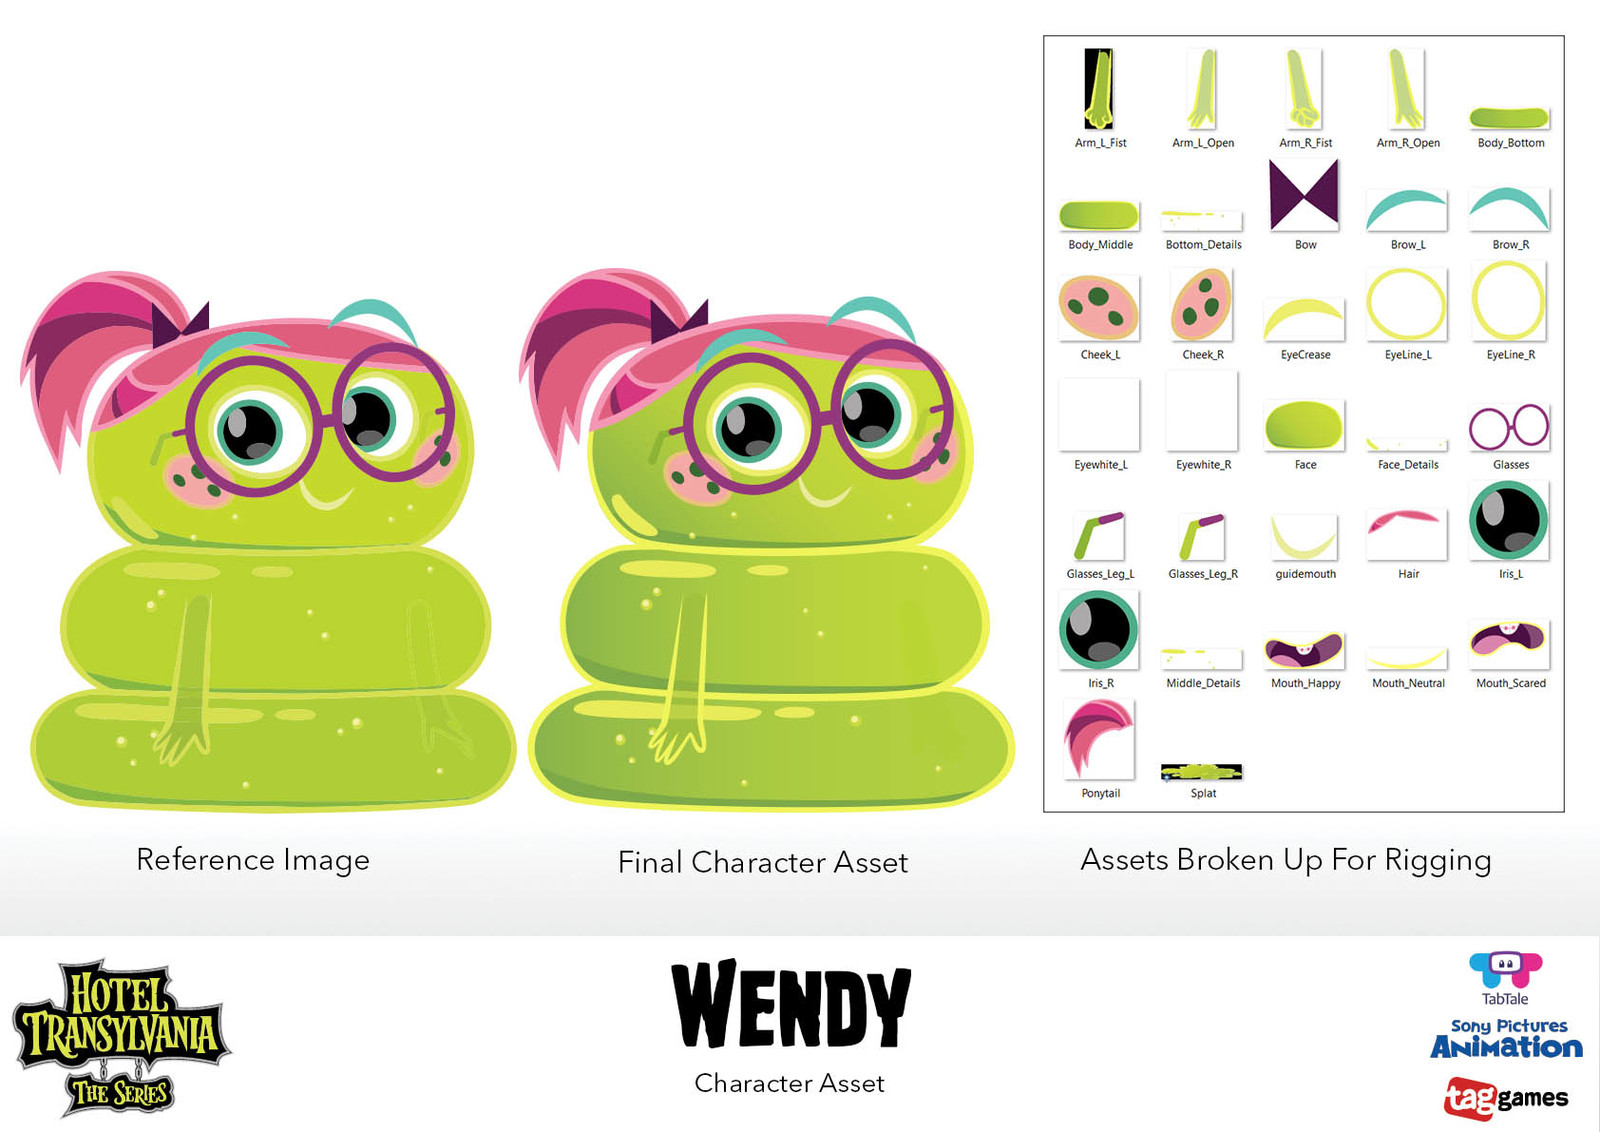 Character Assets - Wendy